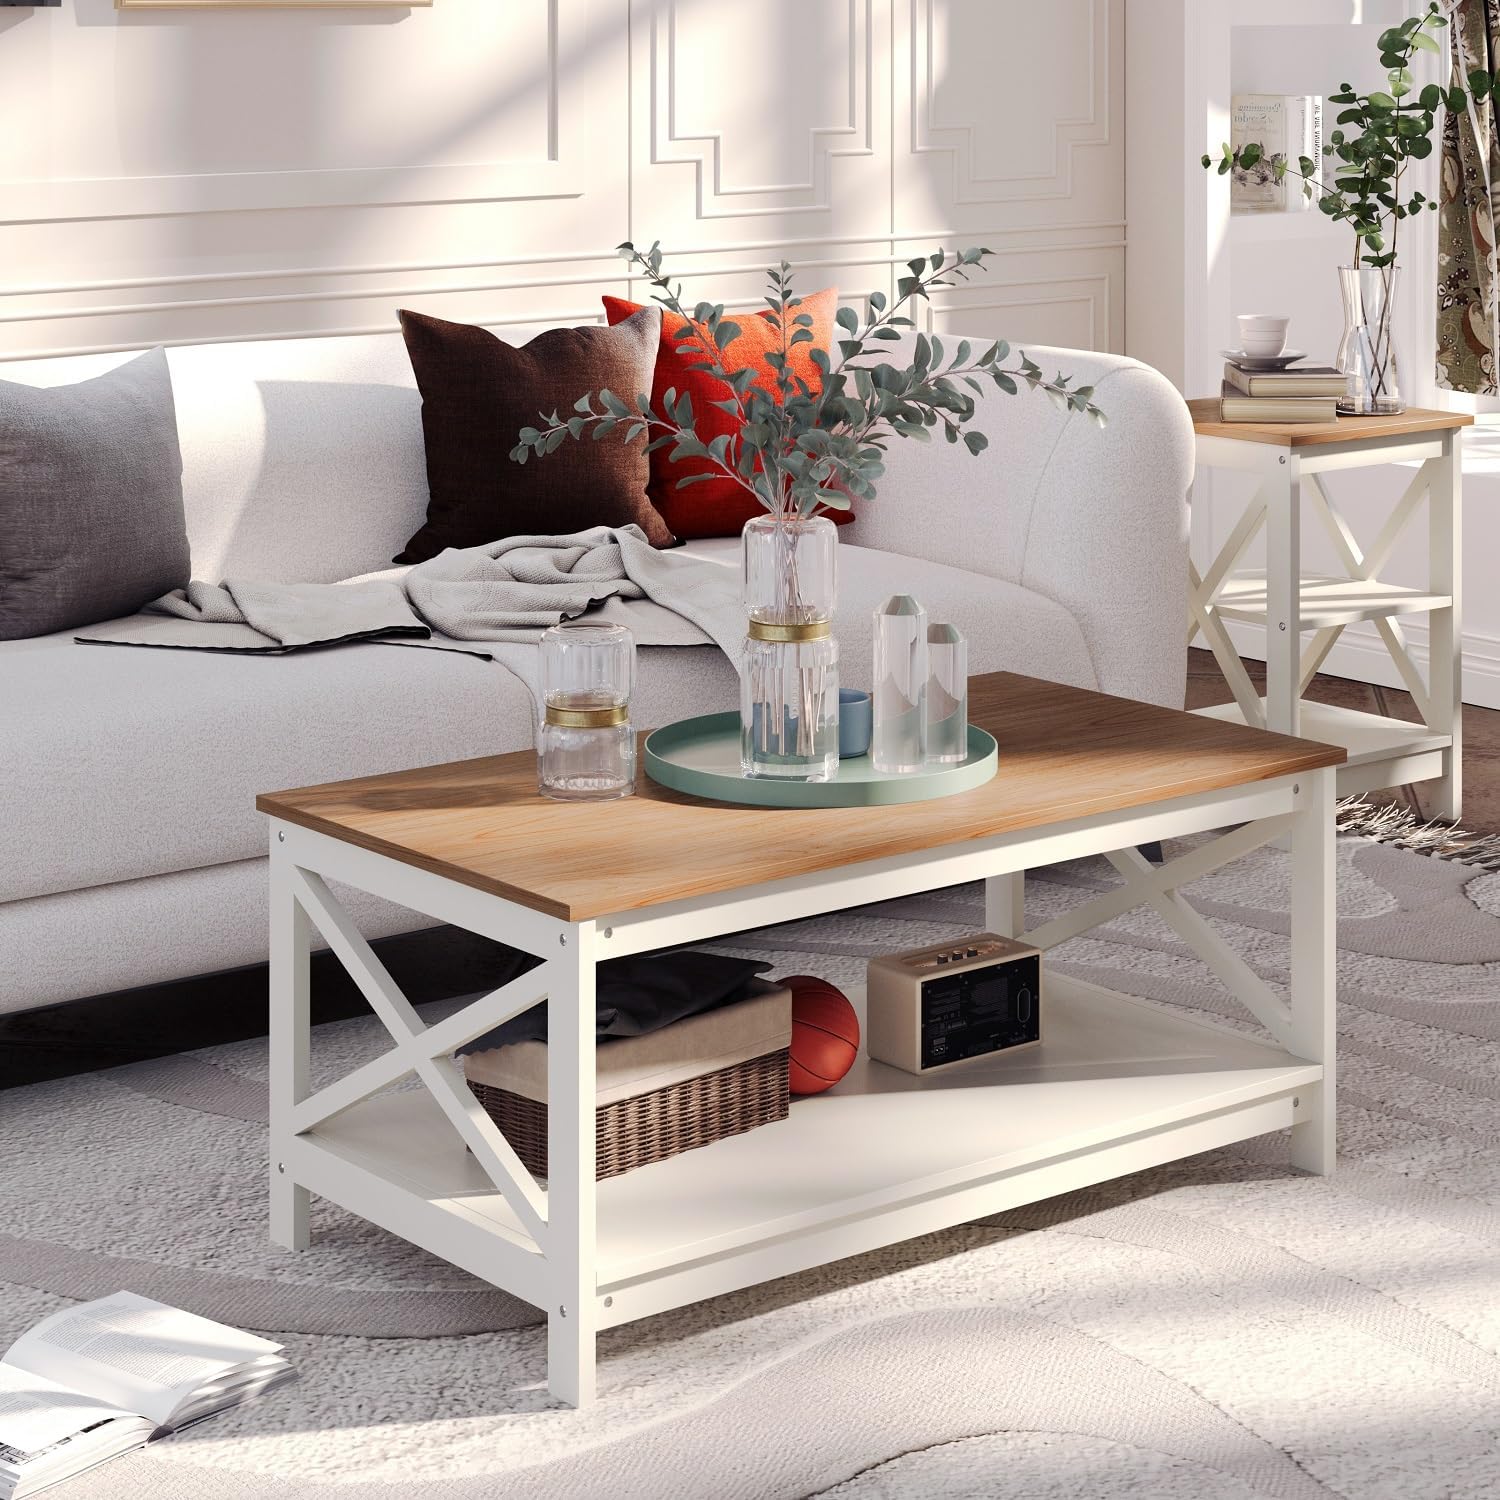 MFSTUDIO Farmhouse Coffee Table with Open Storage Shelf, 2-Tier Wood Center Table for Living Room, Sturdy X Shaped Rectangle Modern Cocktail Table, 40 inch, Ivory